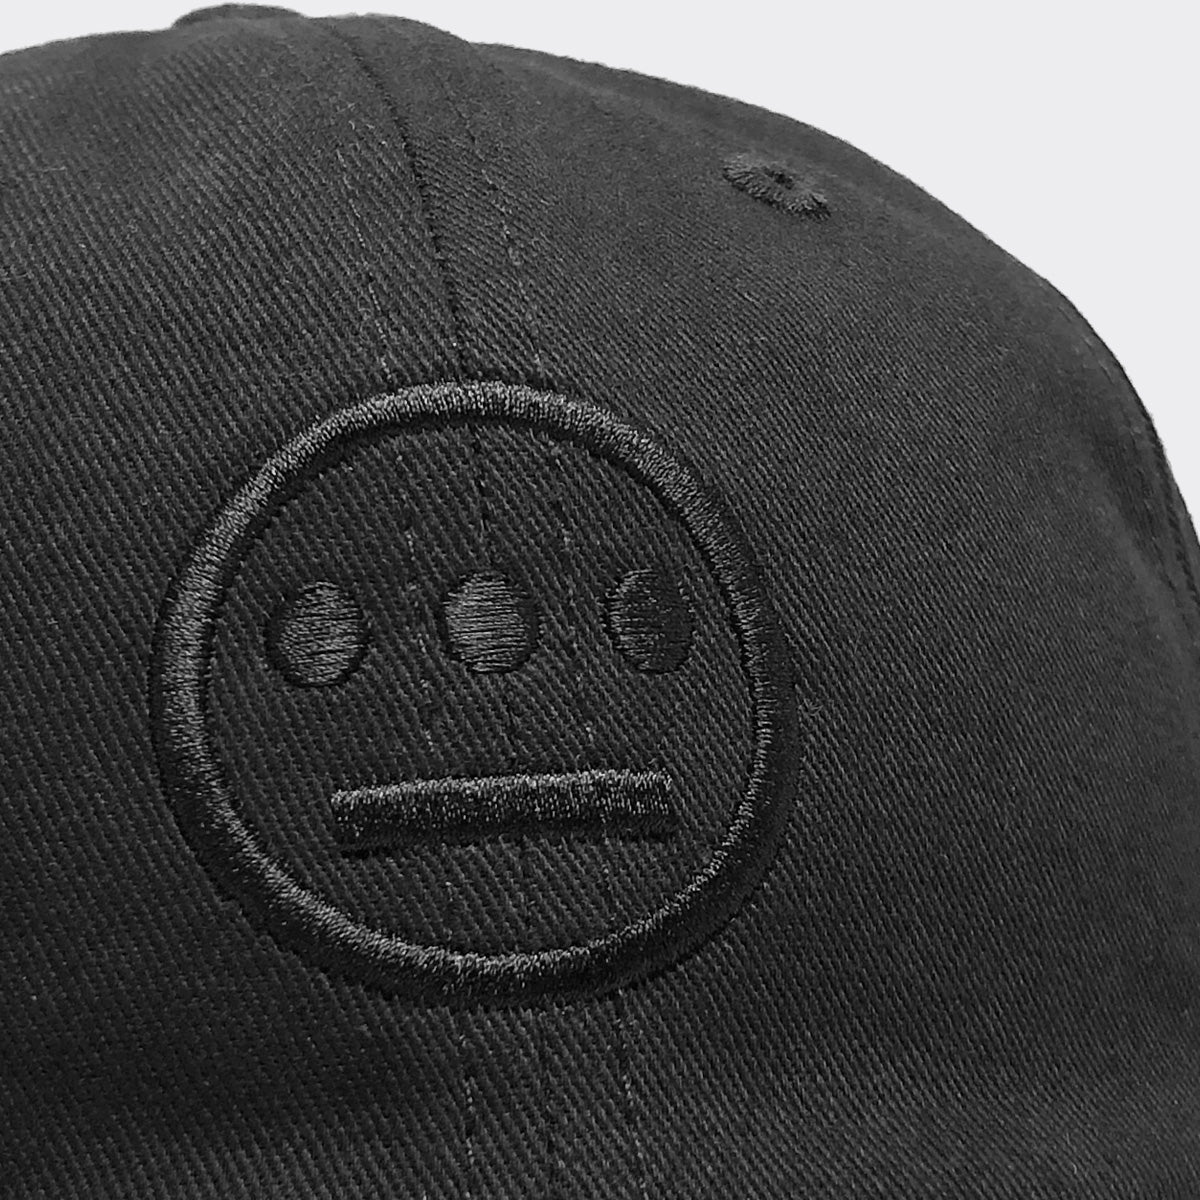 Close up of black embroidered Hiero hip-hop crew logo on crown of a black dad cap.